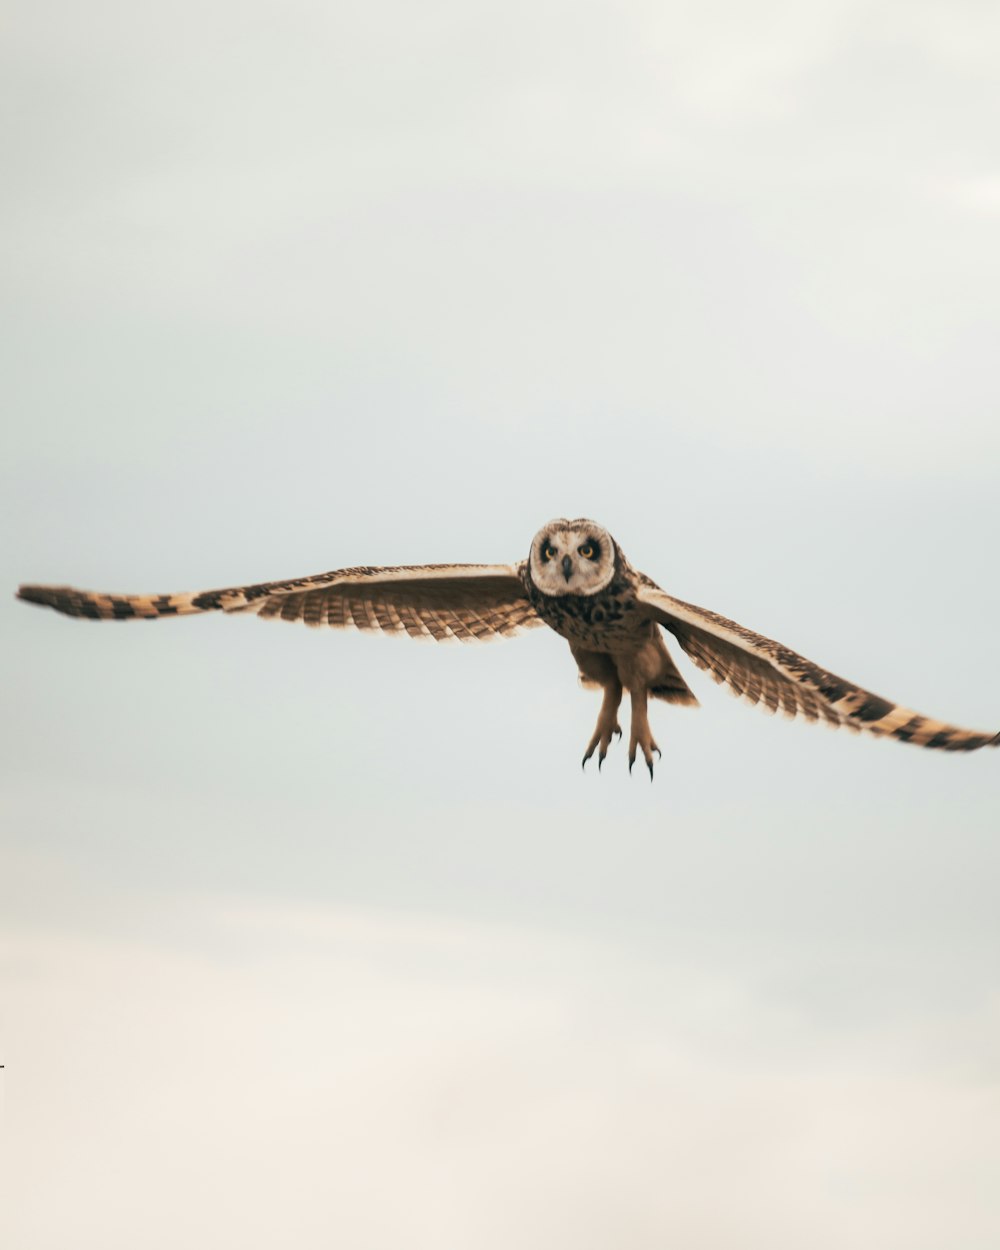 an owl flying through the air with its wings spread